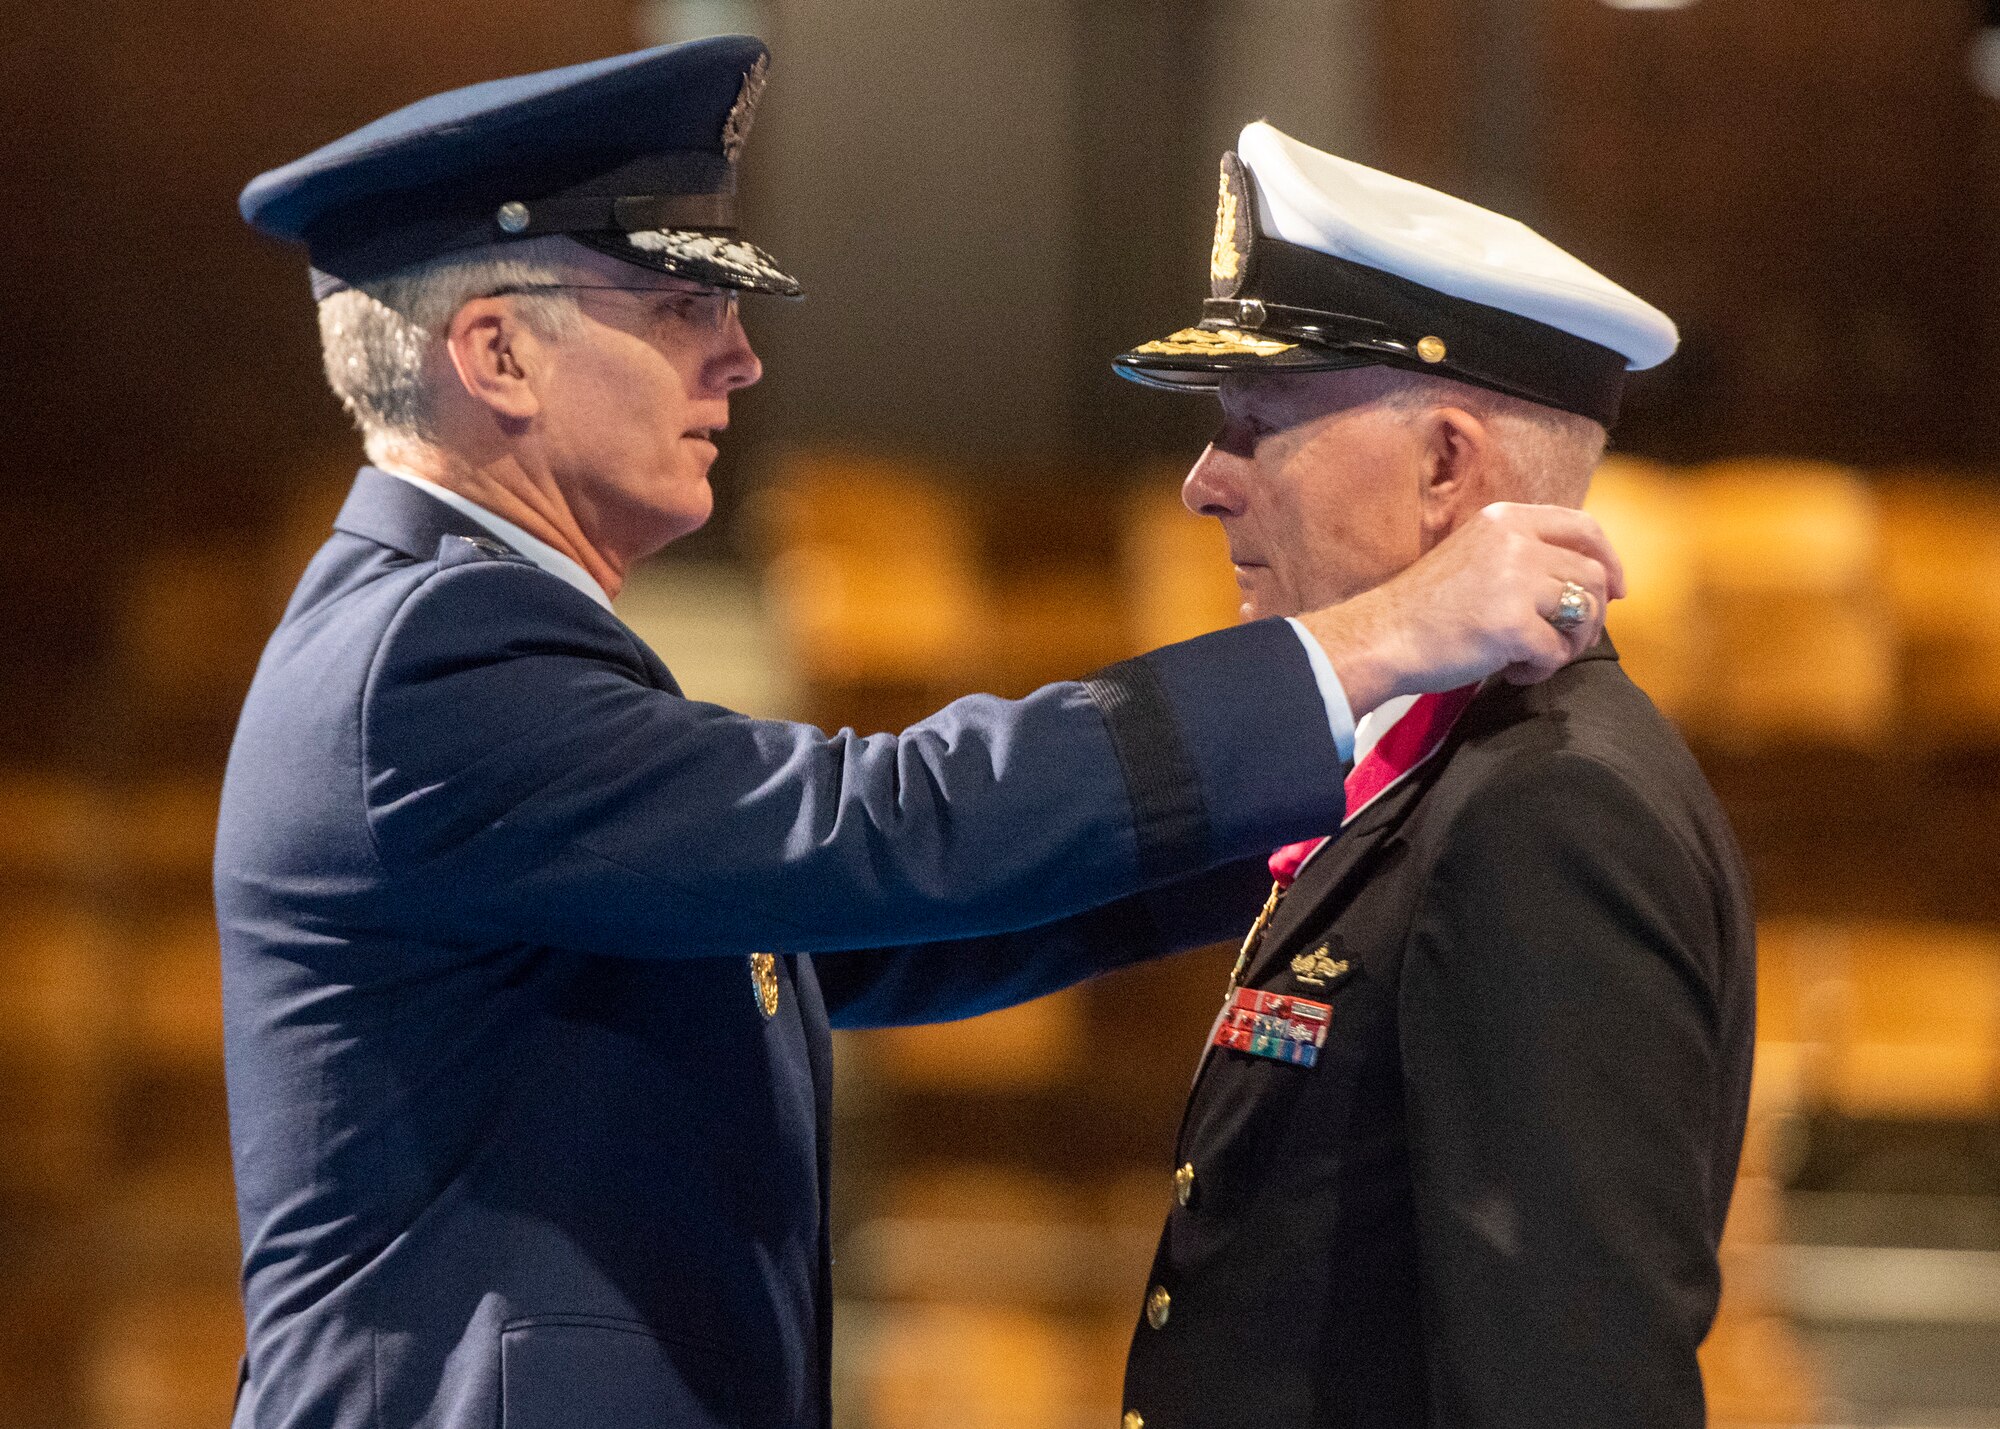 Air Force Gen. Paul J. Selva, vice chairman of the Joint Chiefs of Staff, presents Adm. Haakon Bruun-Hanssen, Norwegian chief of defense, the Legion of Merit during a counterpart visit at Joint Base Myer-Henderson Hall, Sept. 18, 2018.